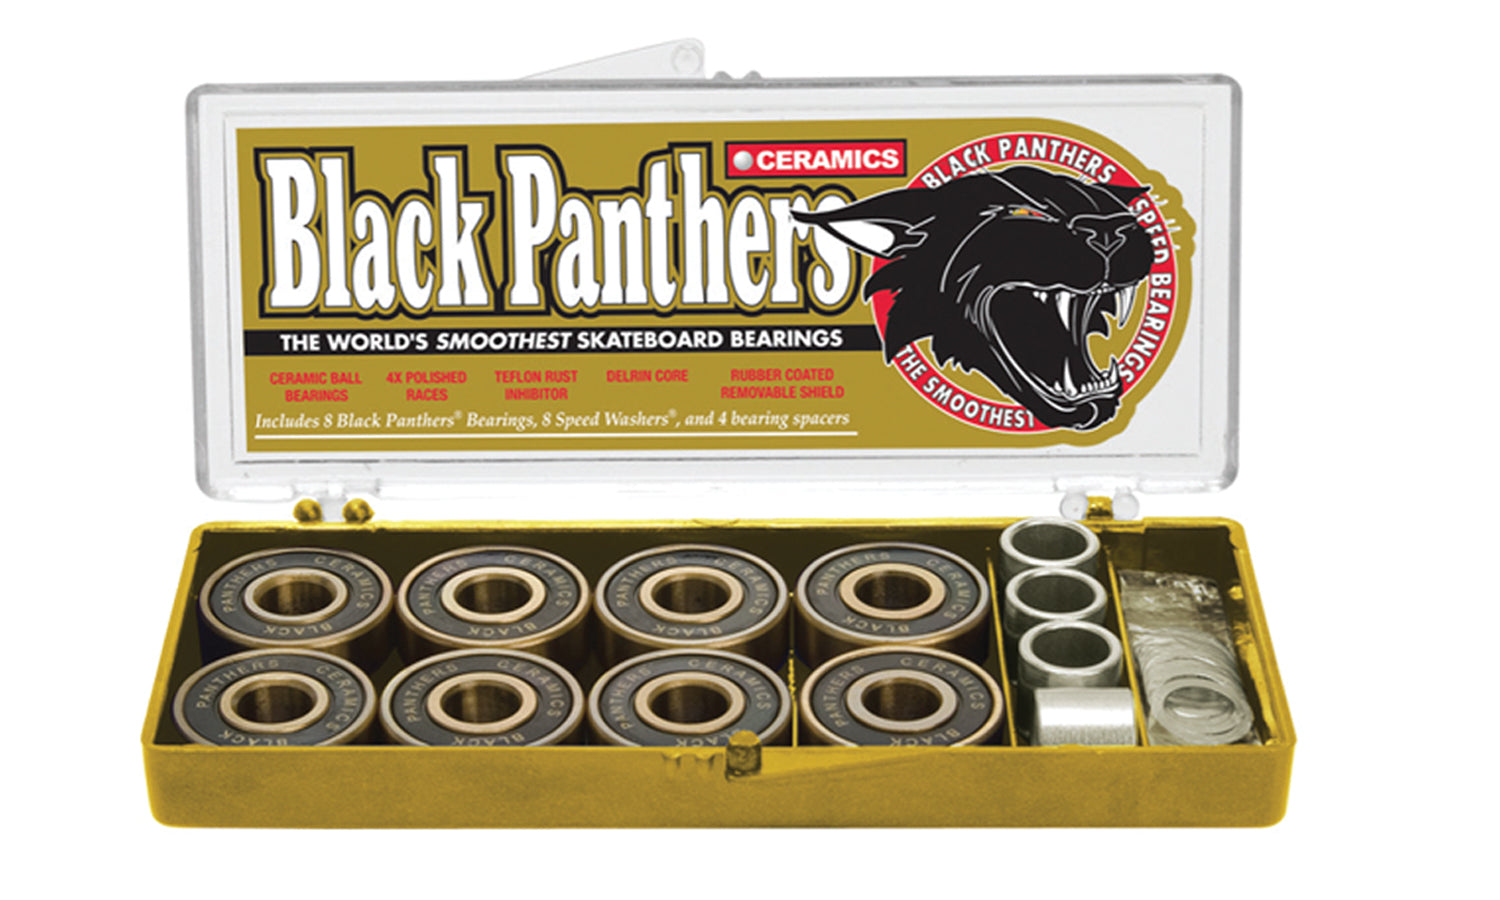 Black Panthers CERAMICS ARE BACK! GET EM WHILE THEY LAST.